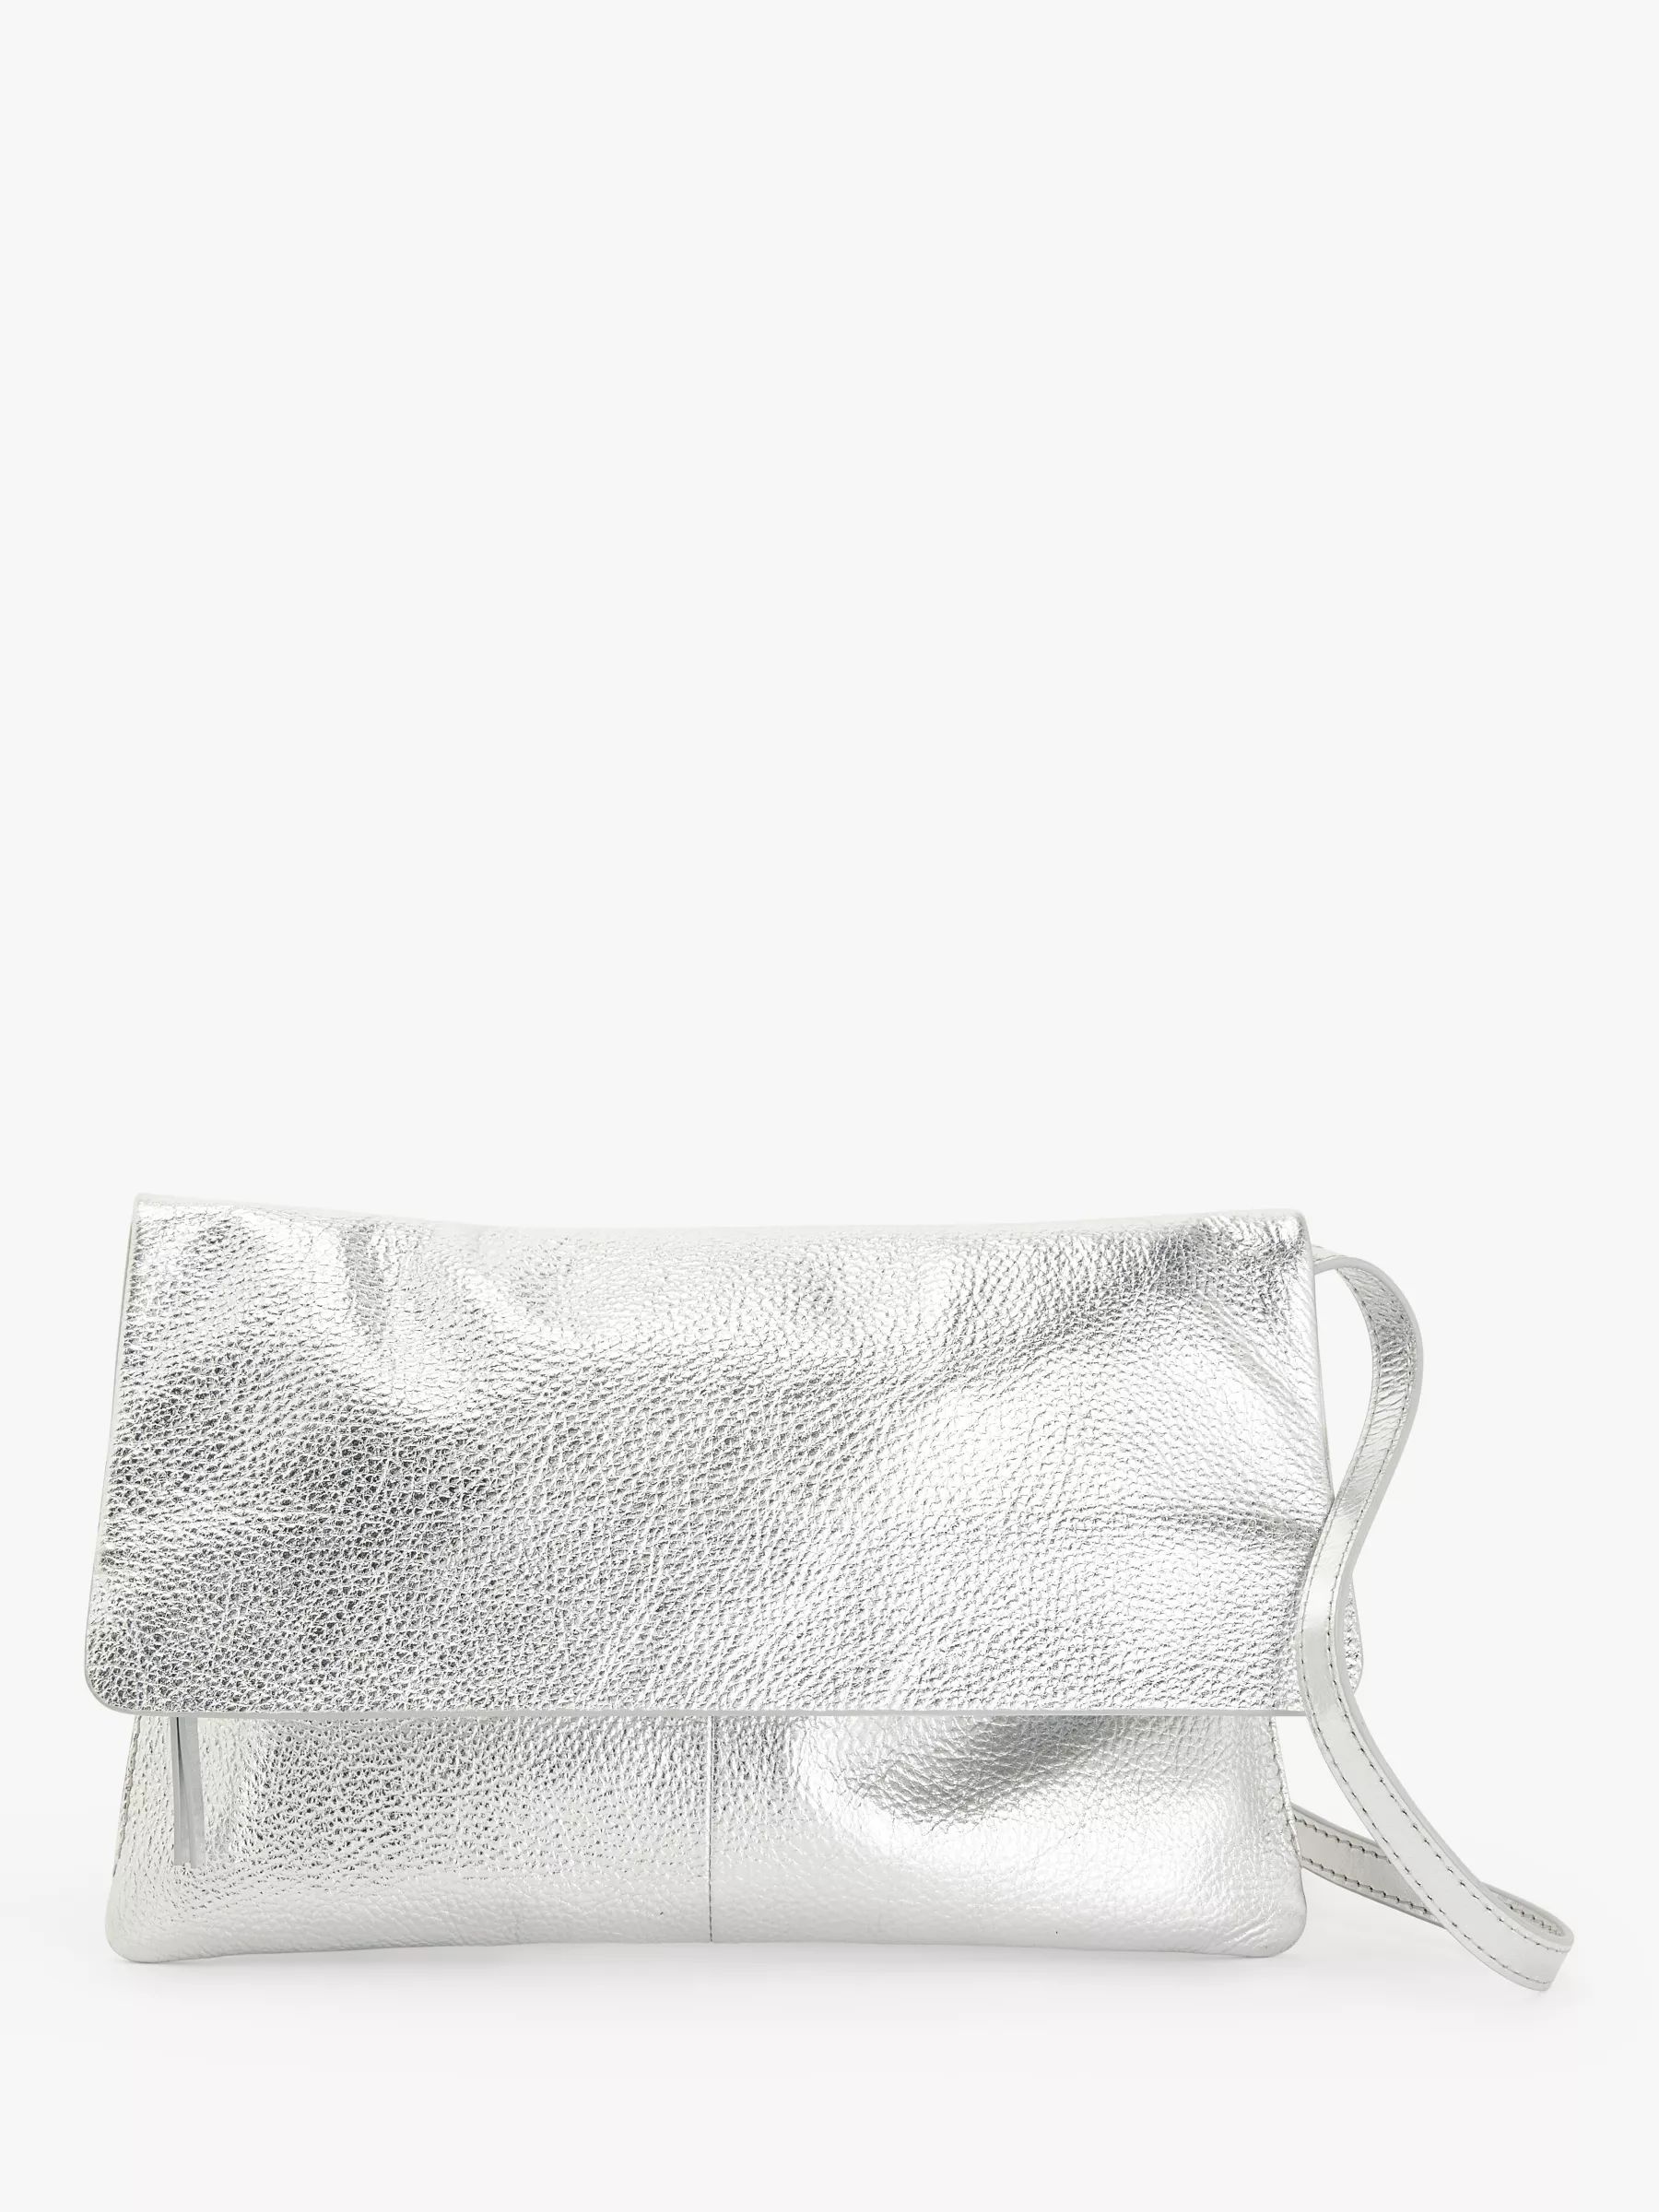 John Lewis Mistry Leather Flapover Clutch Bag, Silver Leather | John Lewis (UK)